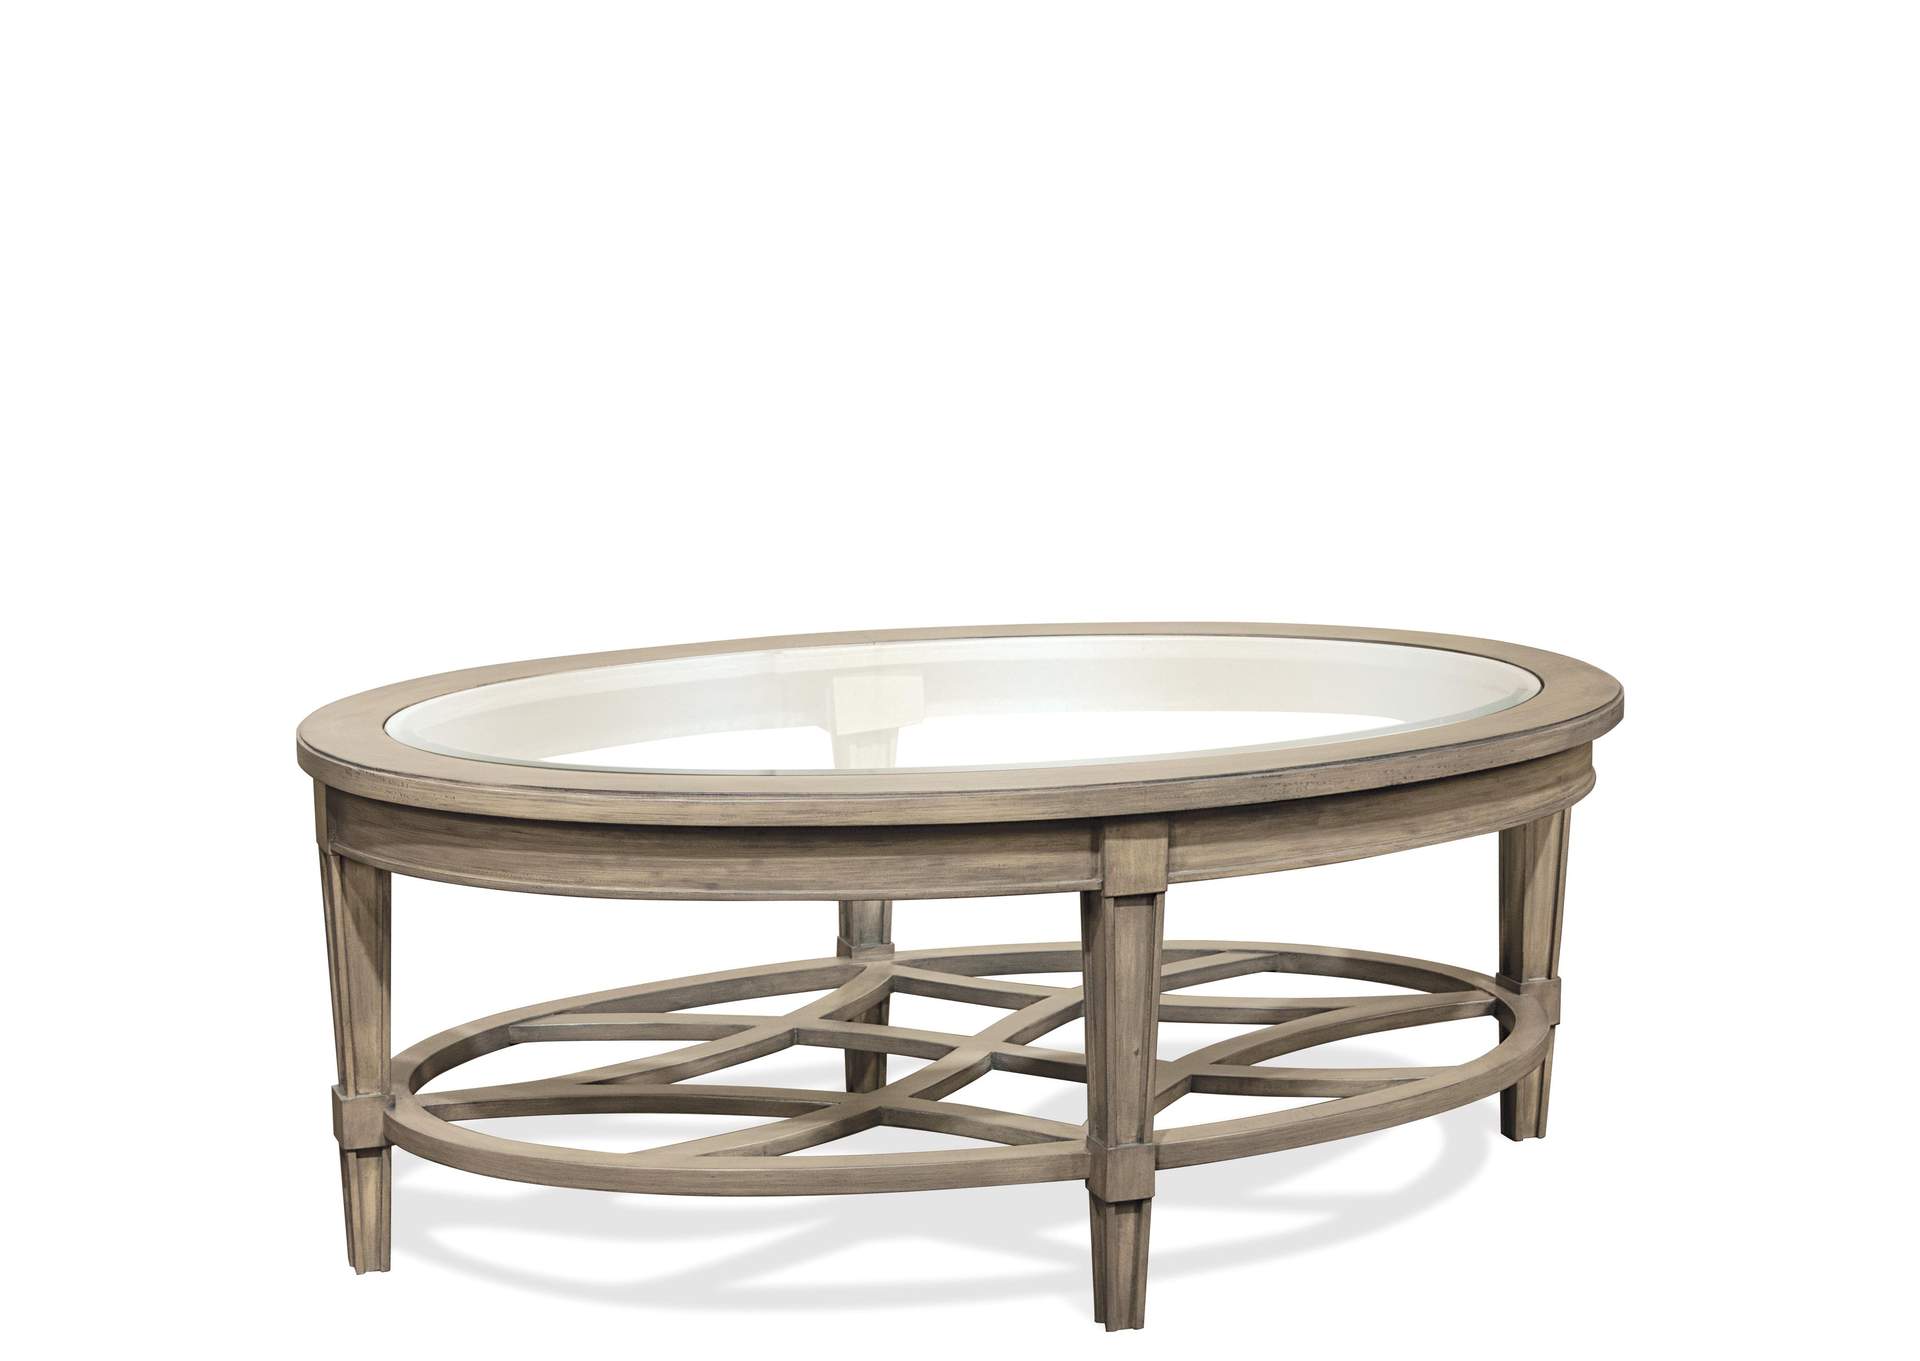 Parkdale Dove Grey Oval Cocktail Table,Riverside